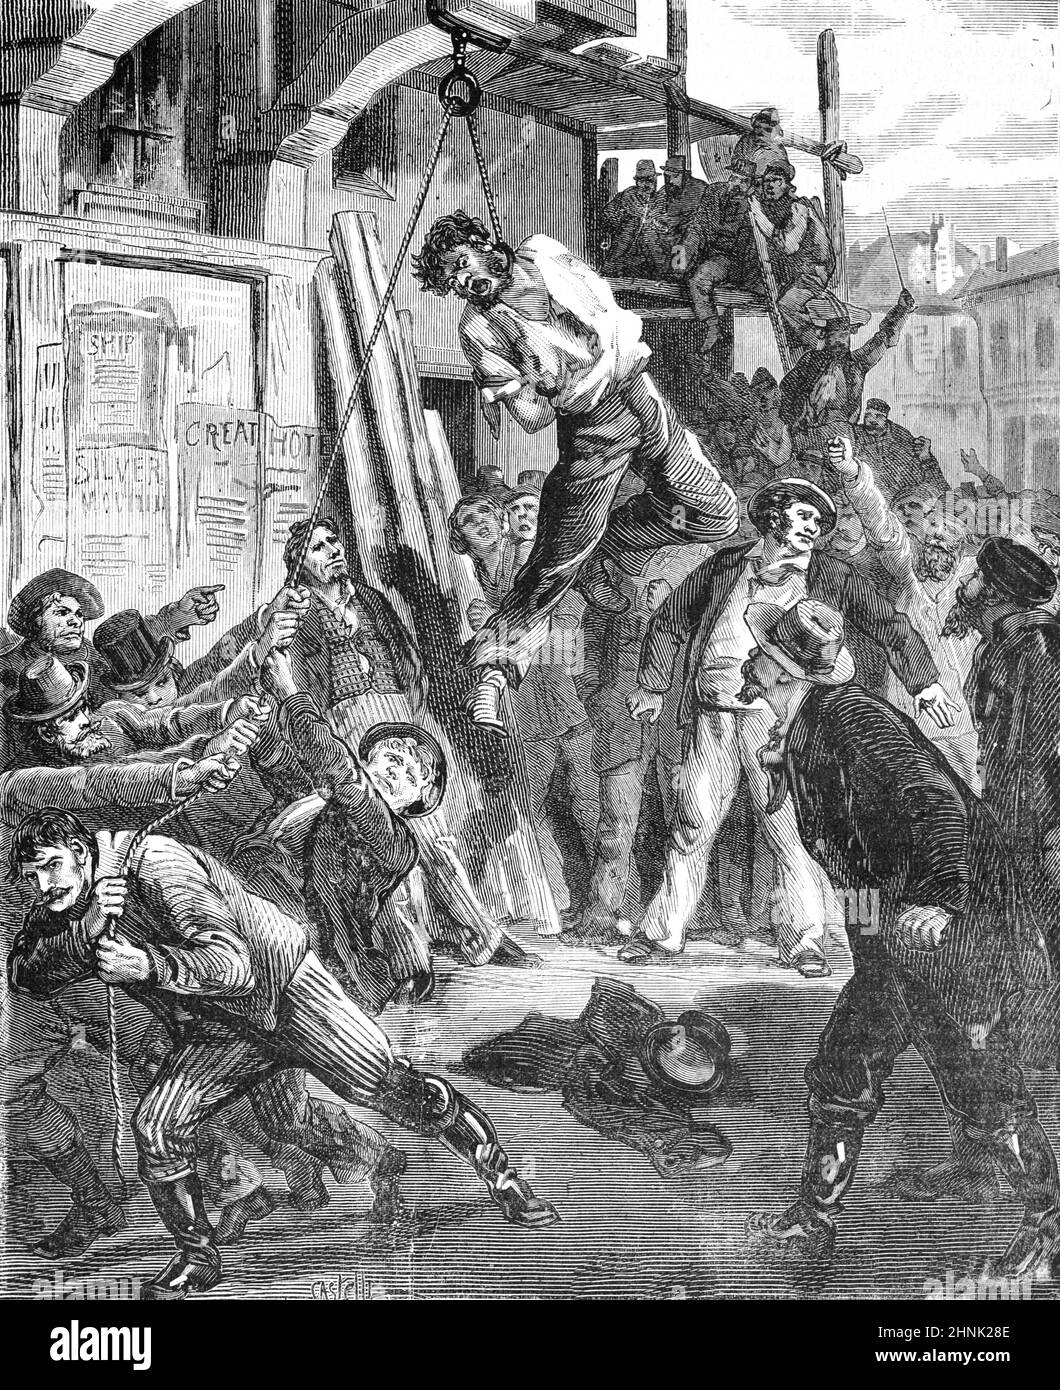 Lynching onr Street Justice in San Francisco United States of America or USA. Vintage Illustration or Engraving 1878 (Castelli) Stock Photo